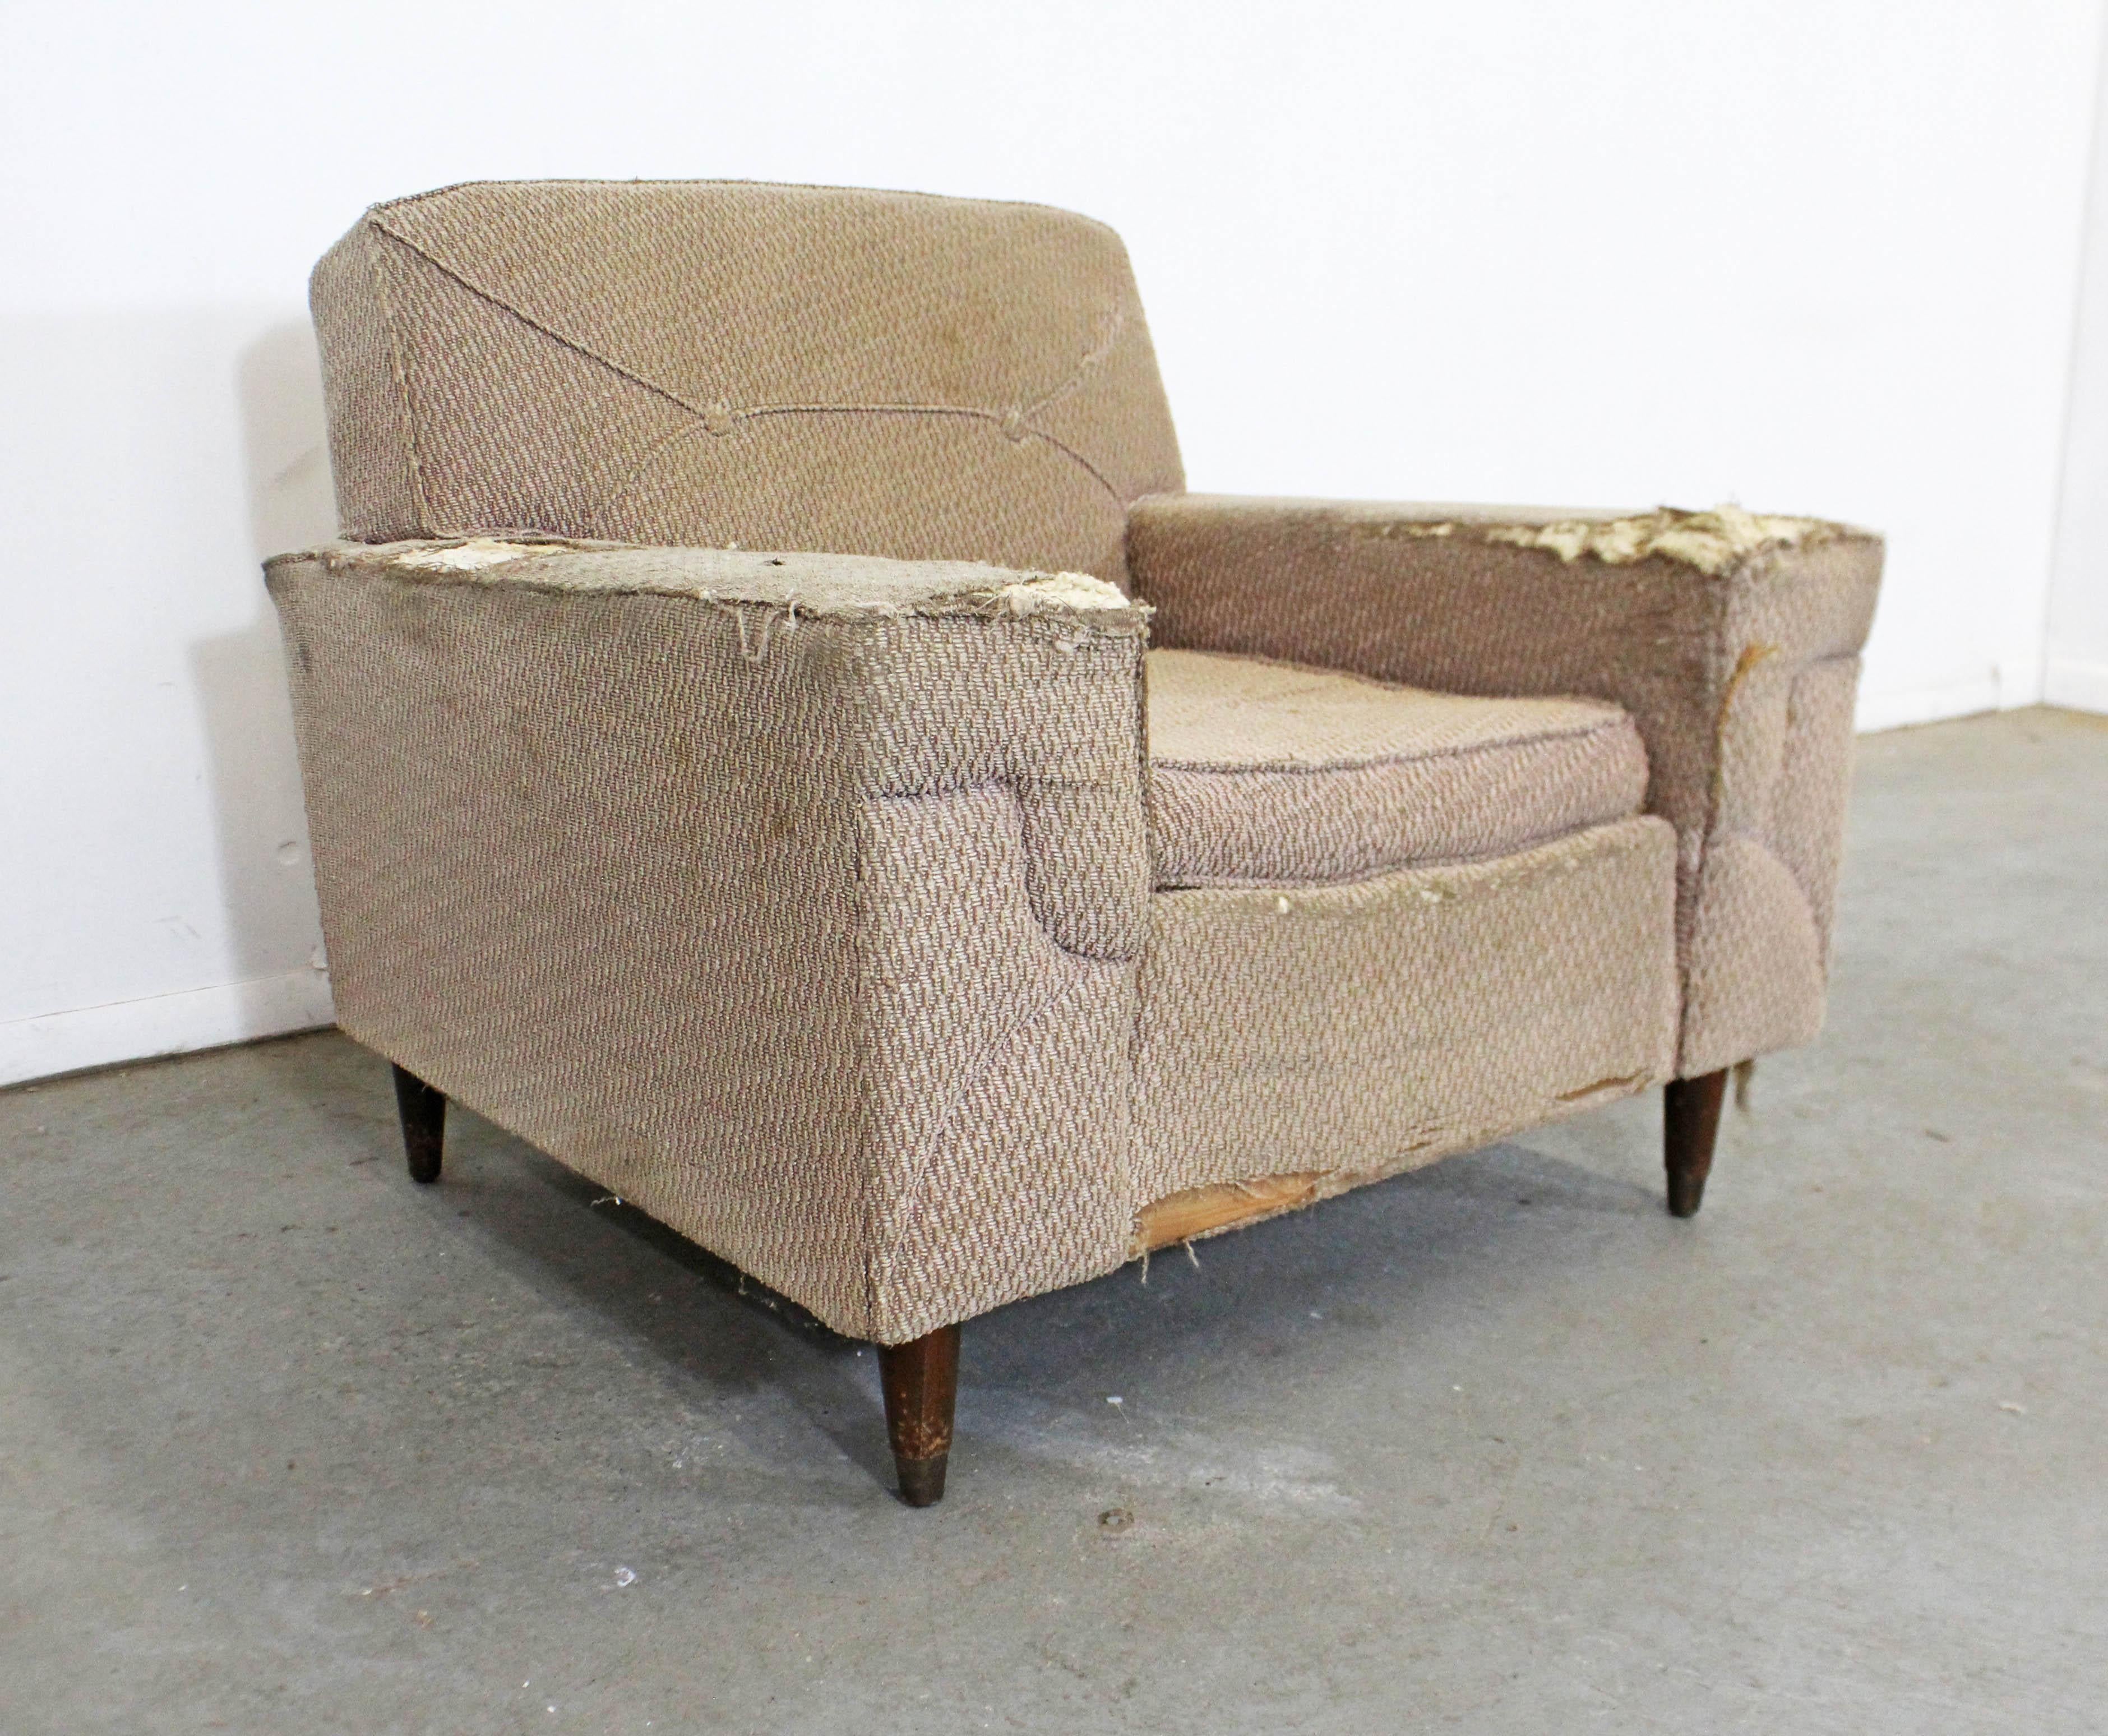 Offered is a vintage Mid-Century Modern lounge chair by Kroehler. This chair dates back to the 1950s, shows obvious age wear and needs to be reupholstered. It is structurally sound. It is signed by Kroehler. Needs work, but has lots of potential1